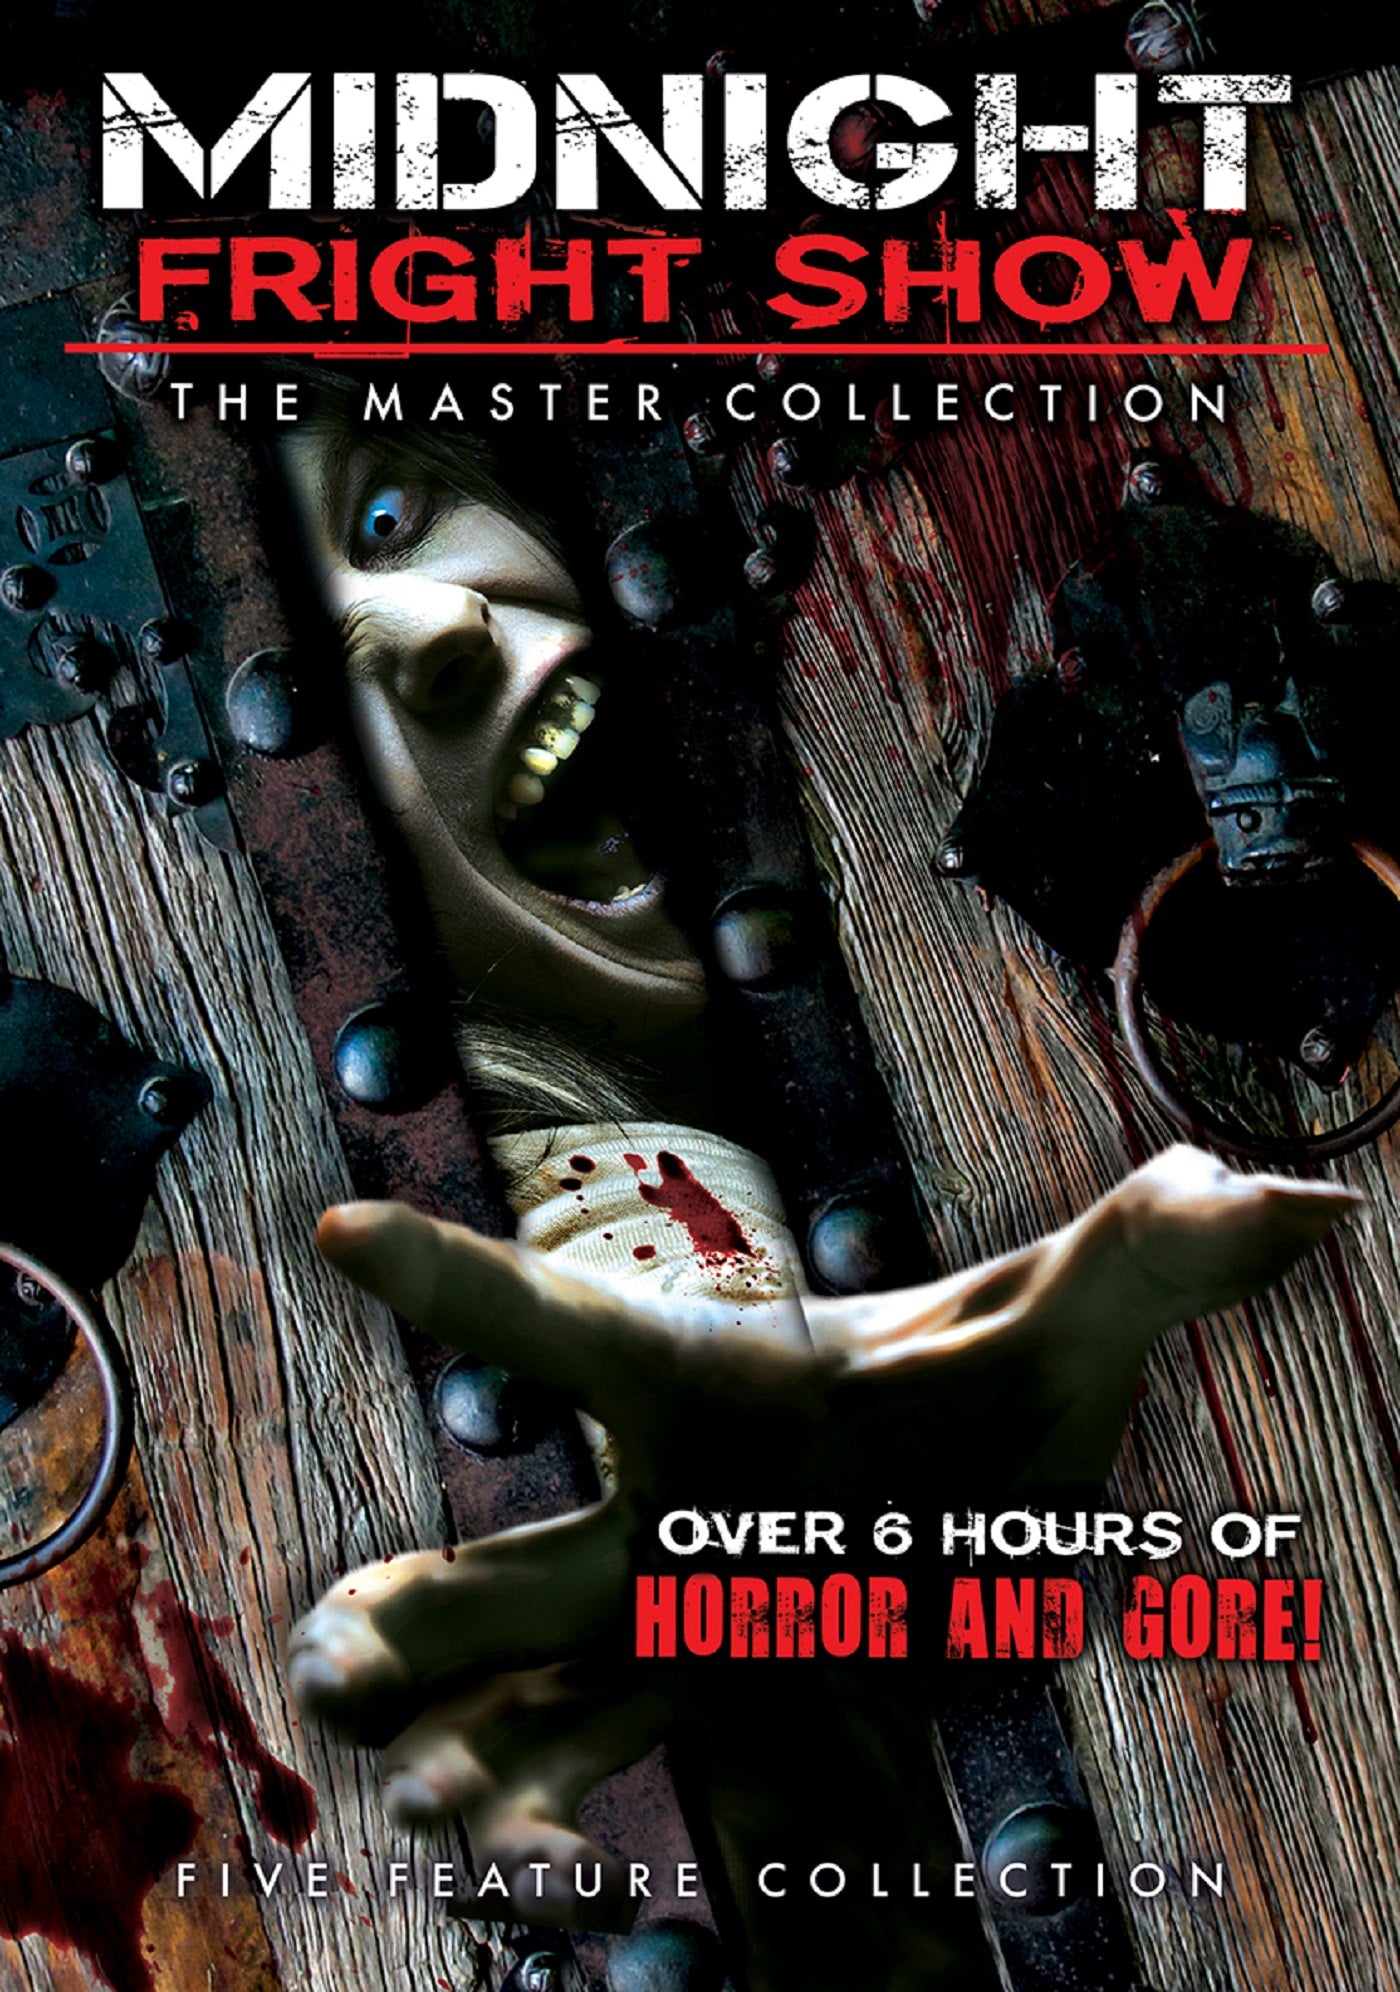 MIDNIGHT FRIGHT SHOW: THE MASTER COLLECTION DVD